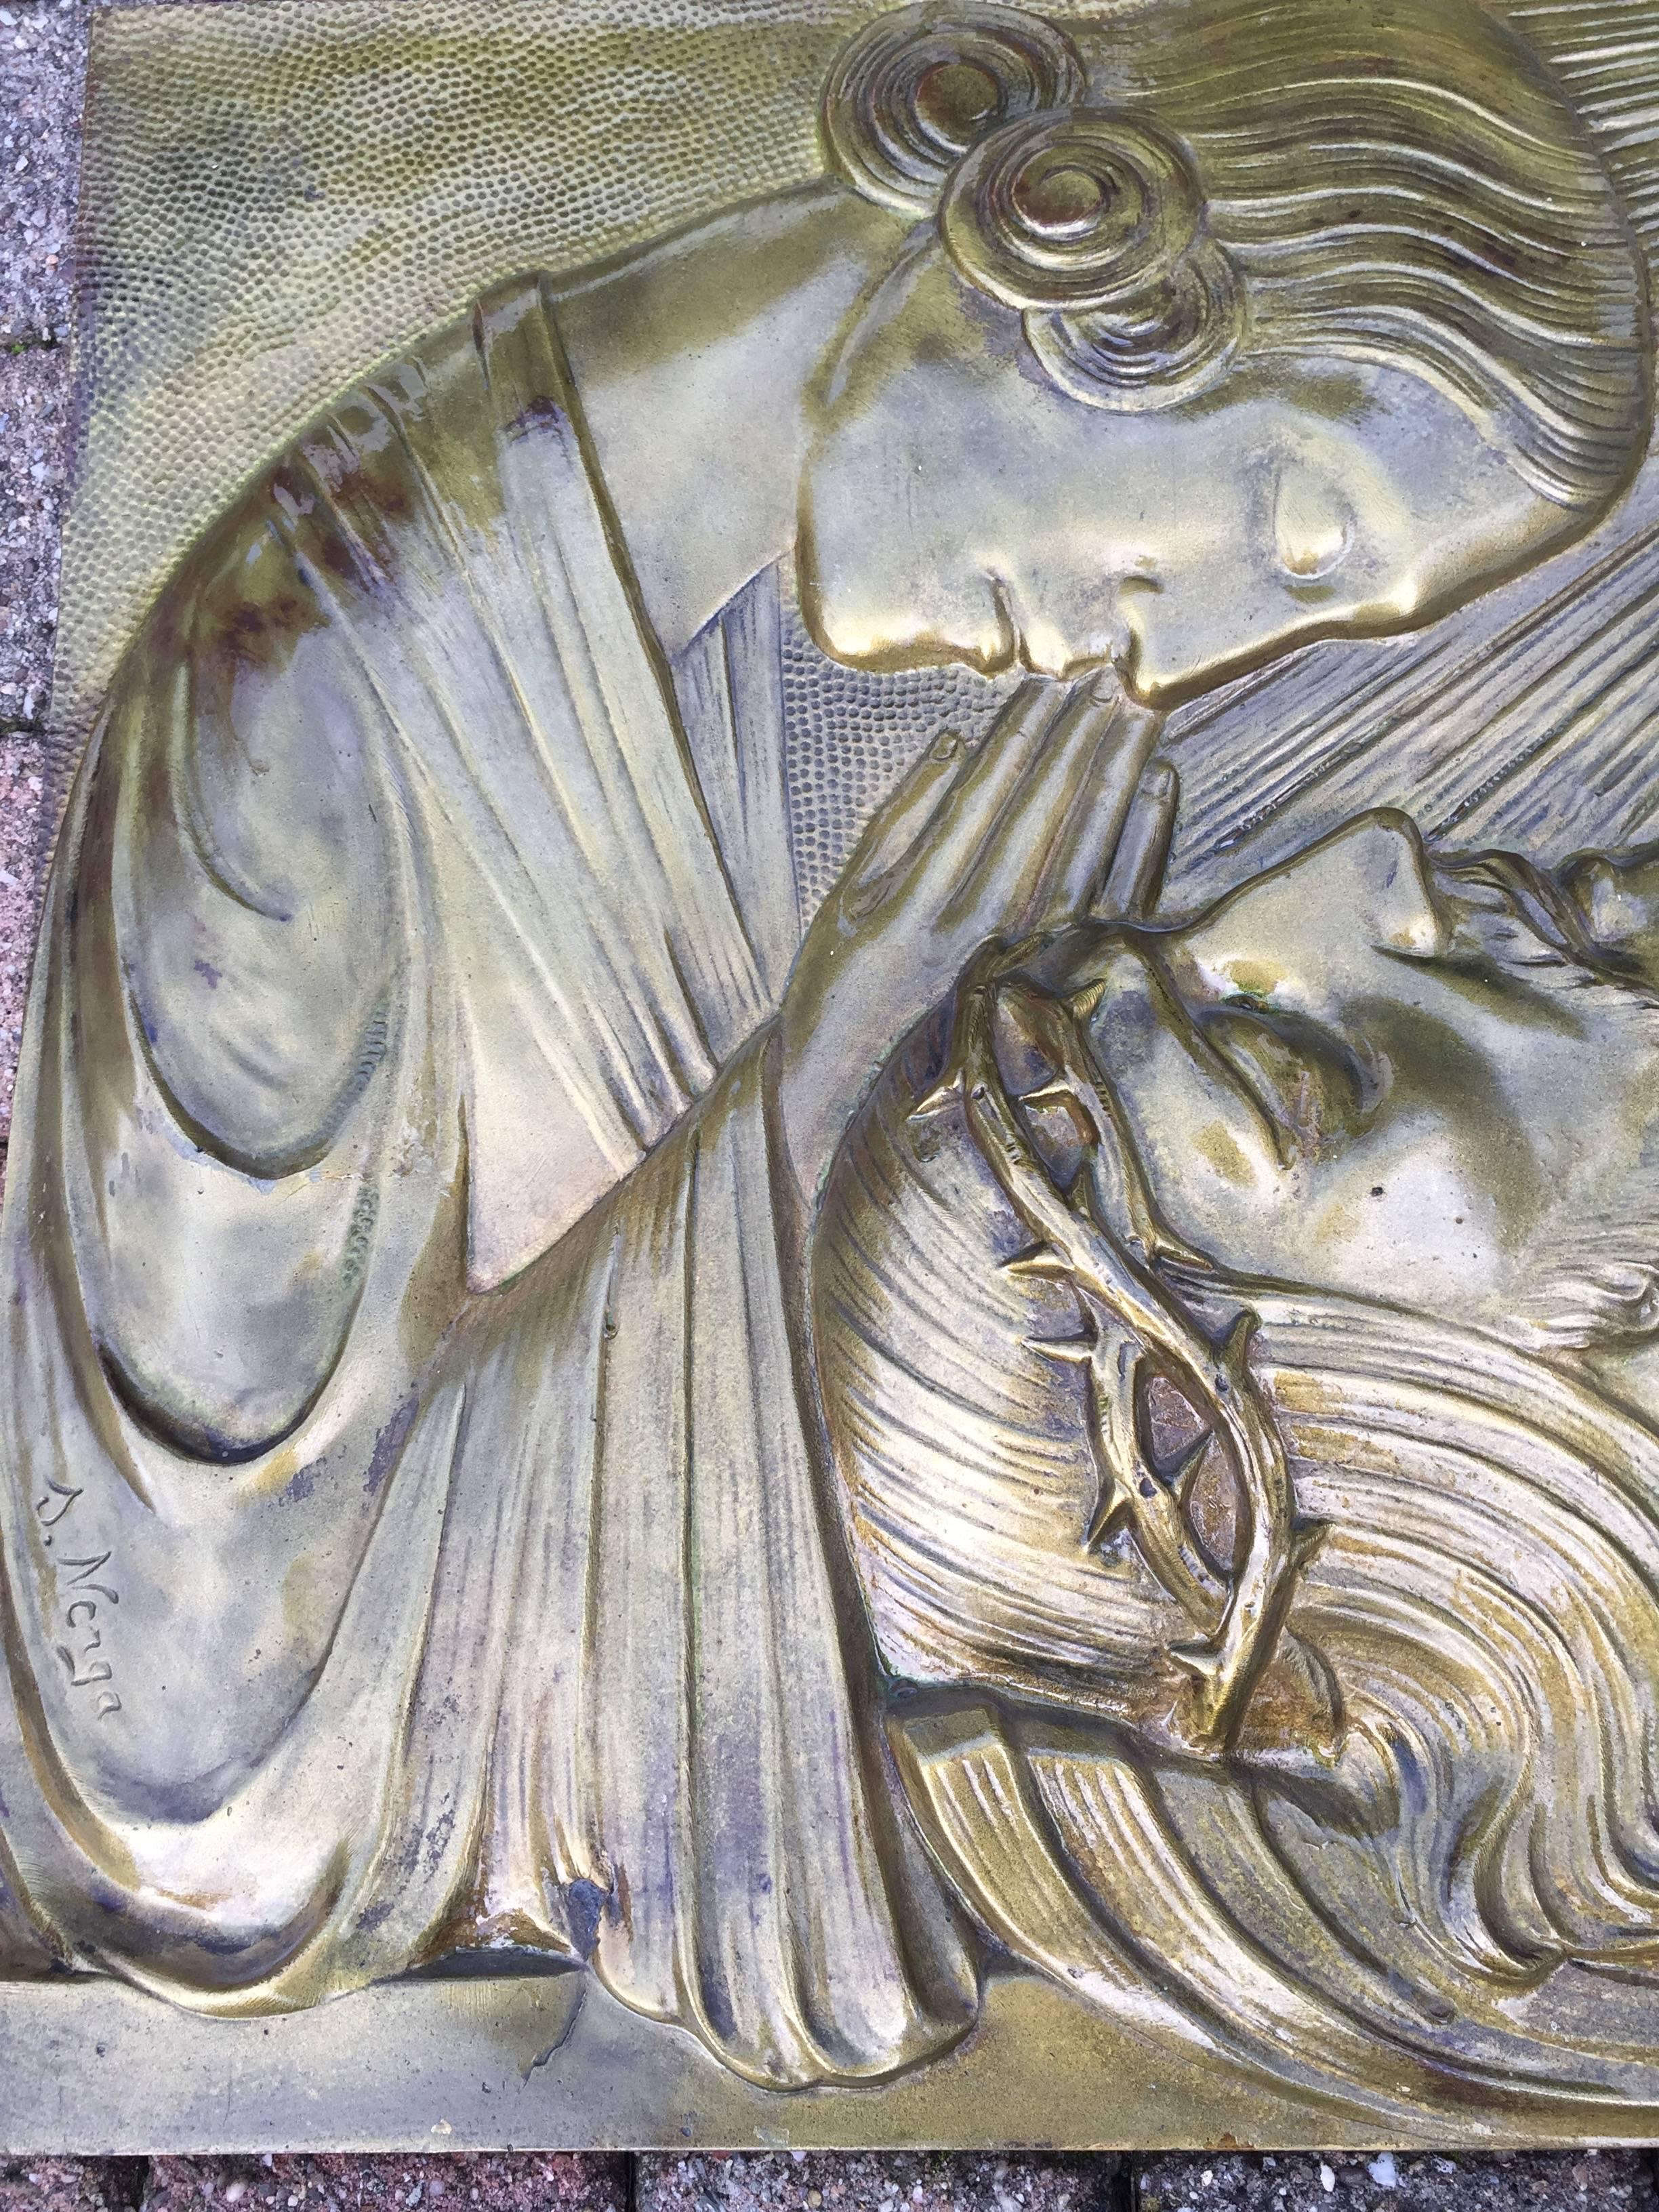 Large and heavy Art Deco bronze of the pieta by Silvain Norga

This large bronze wall plaque depicts the Virgin Mary praying over the body of Jesus Christ after the Crucifixion. The typical Art Deco hairstyle of Mother Mary and the holy light